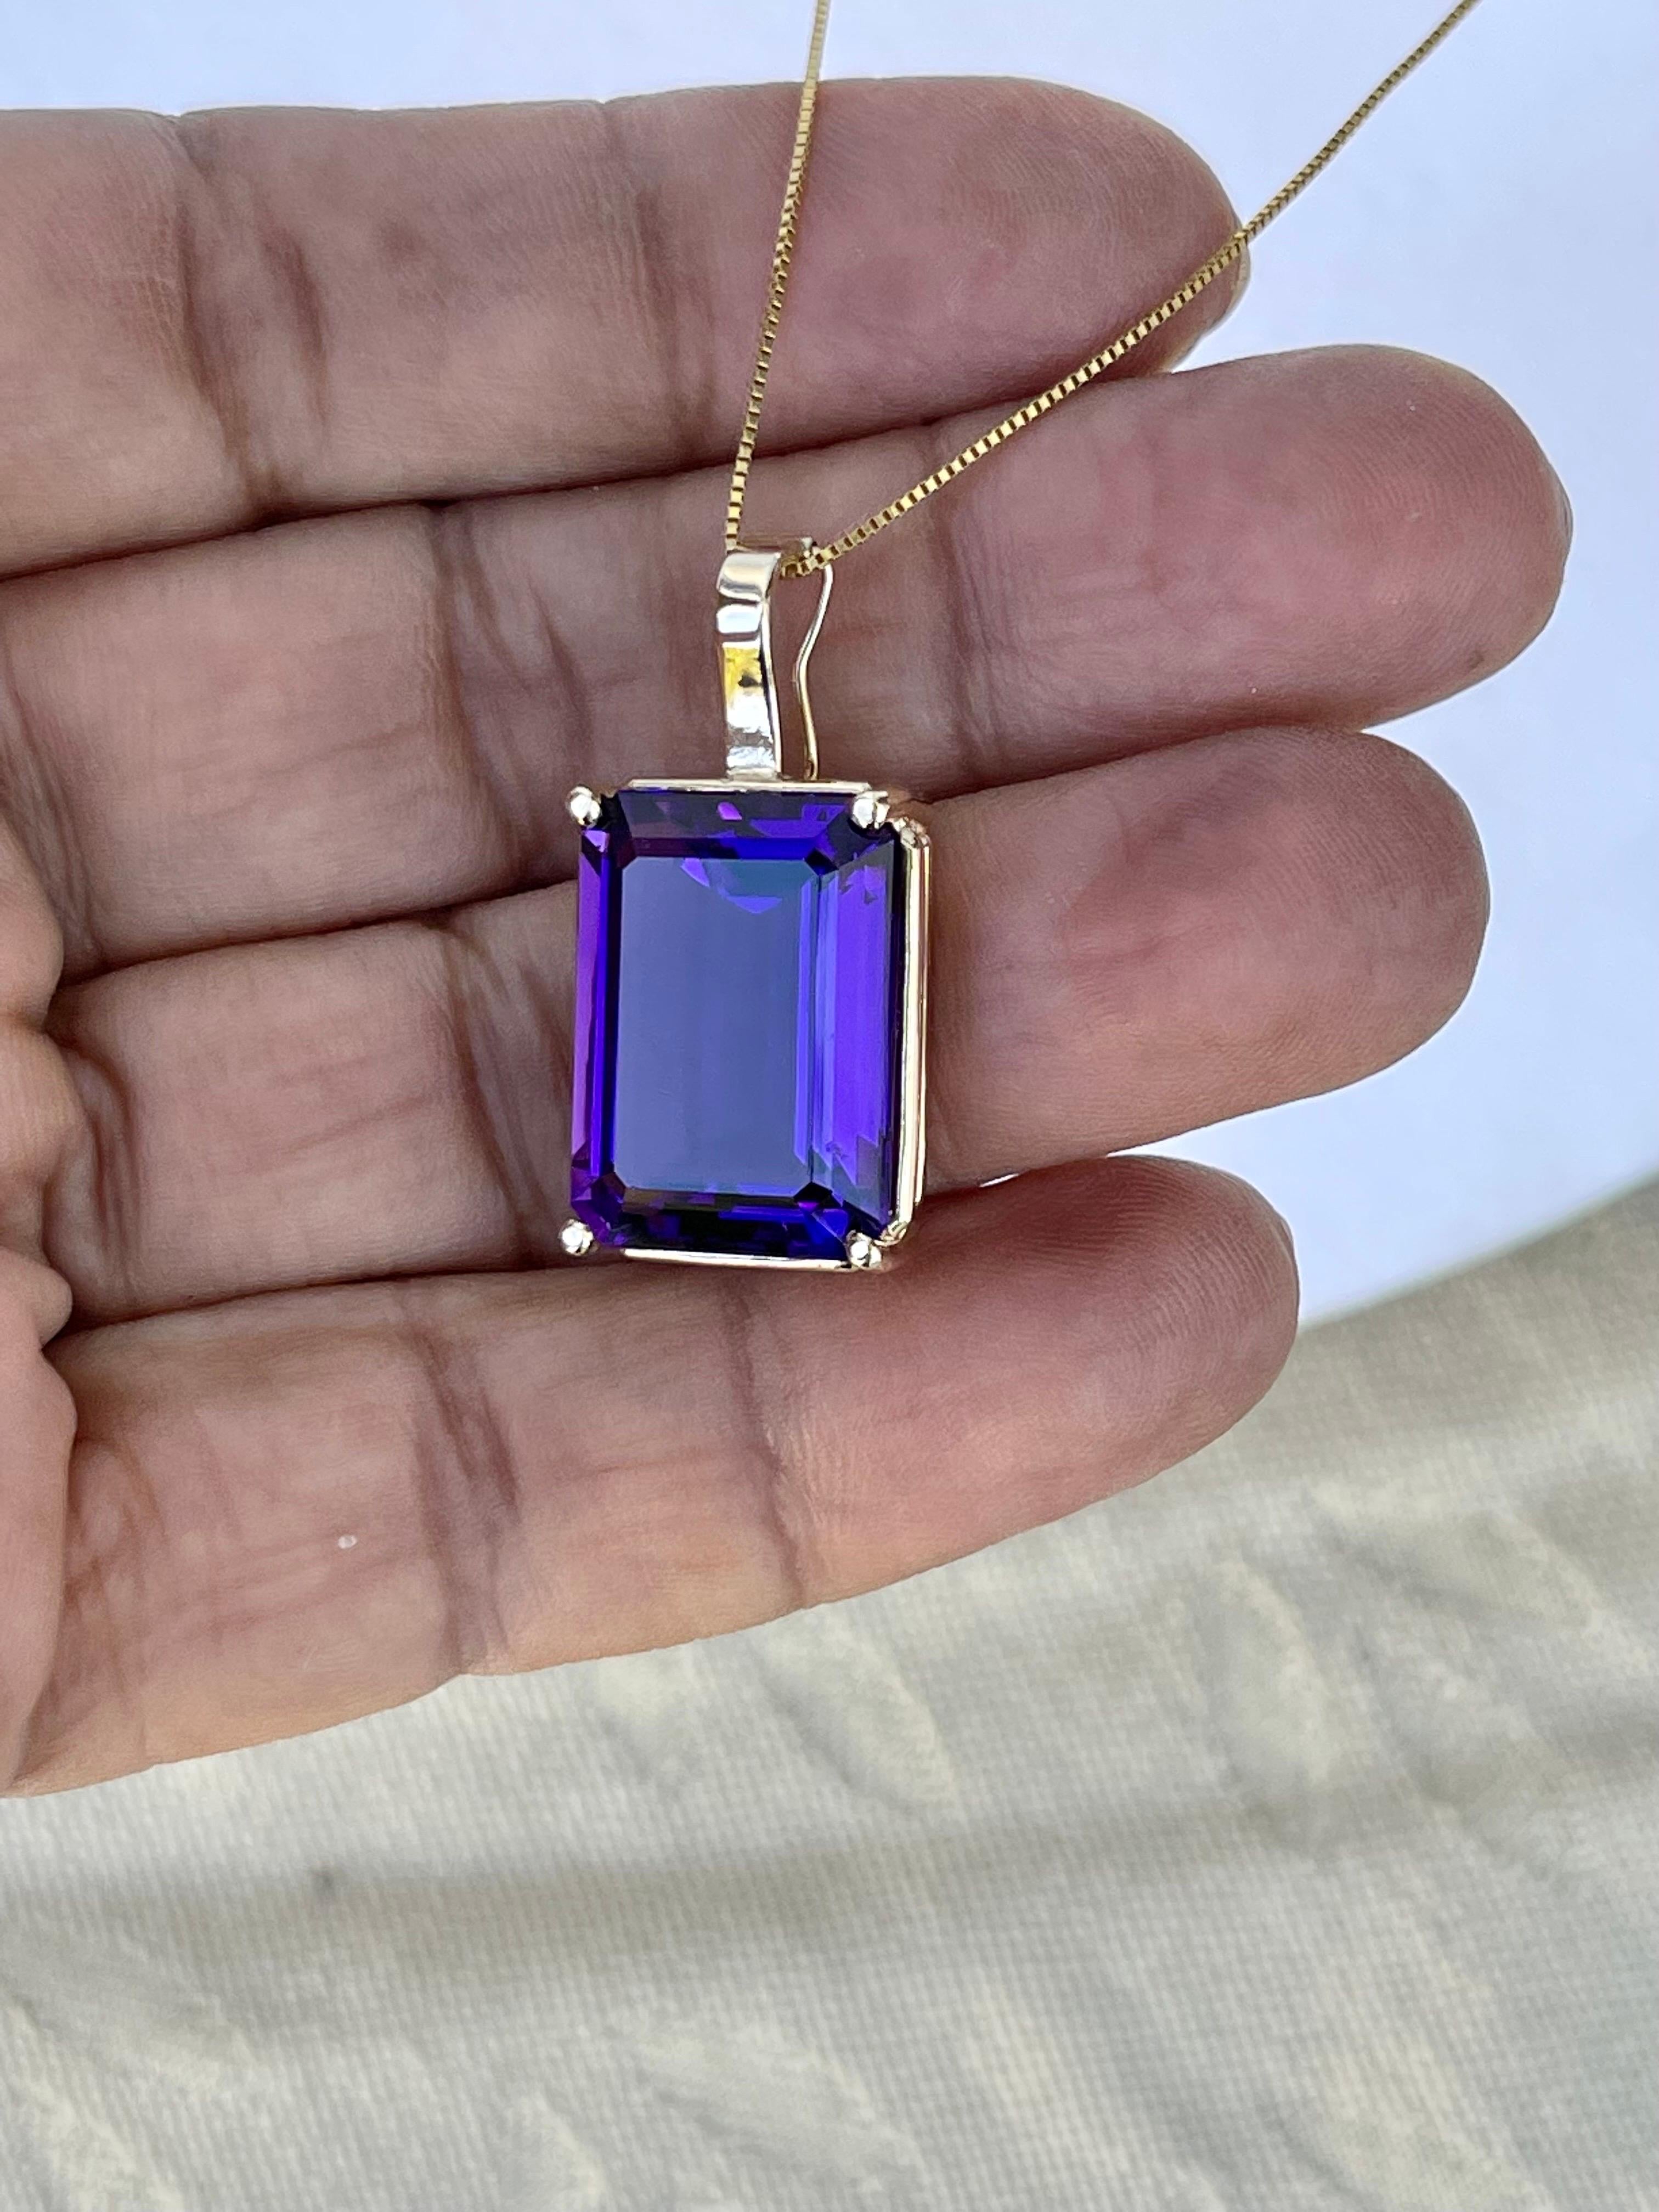 12 Ct Emerald Cut Amethyst Pendant /Necklace + 14 Kt Yellow Gold Chain Vintage For Sale 1